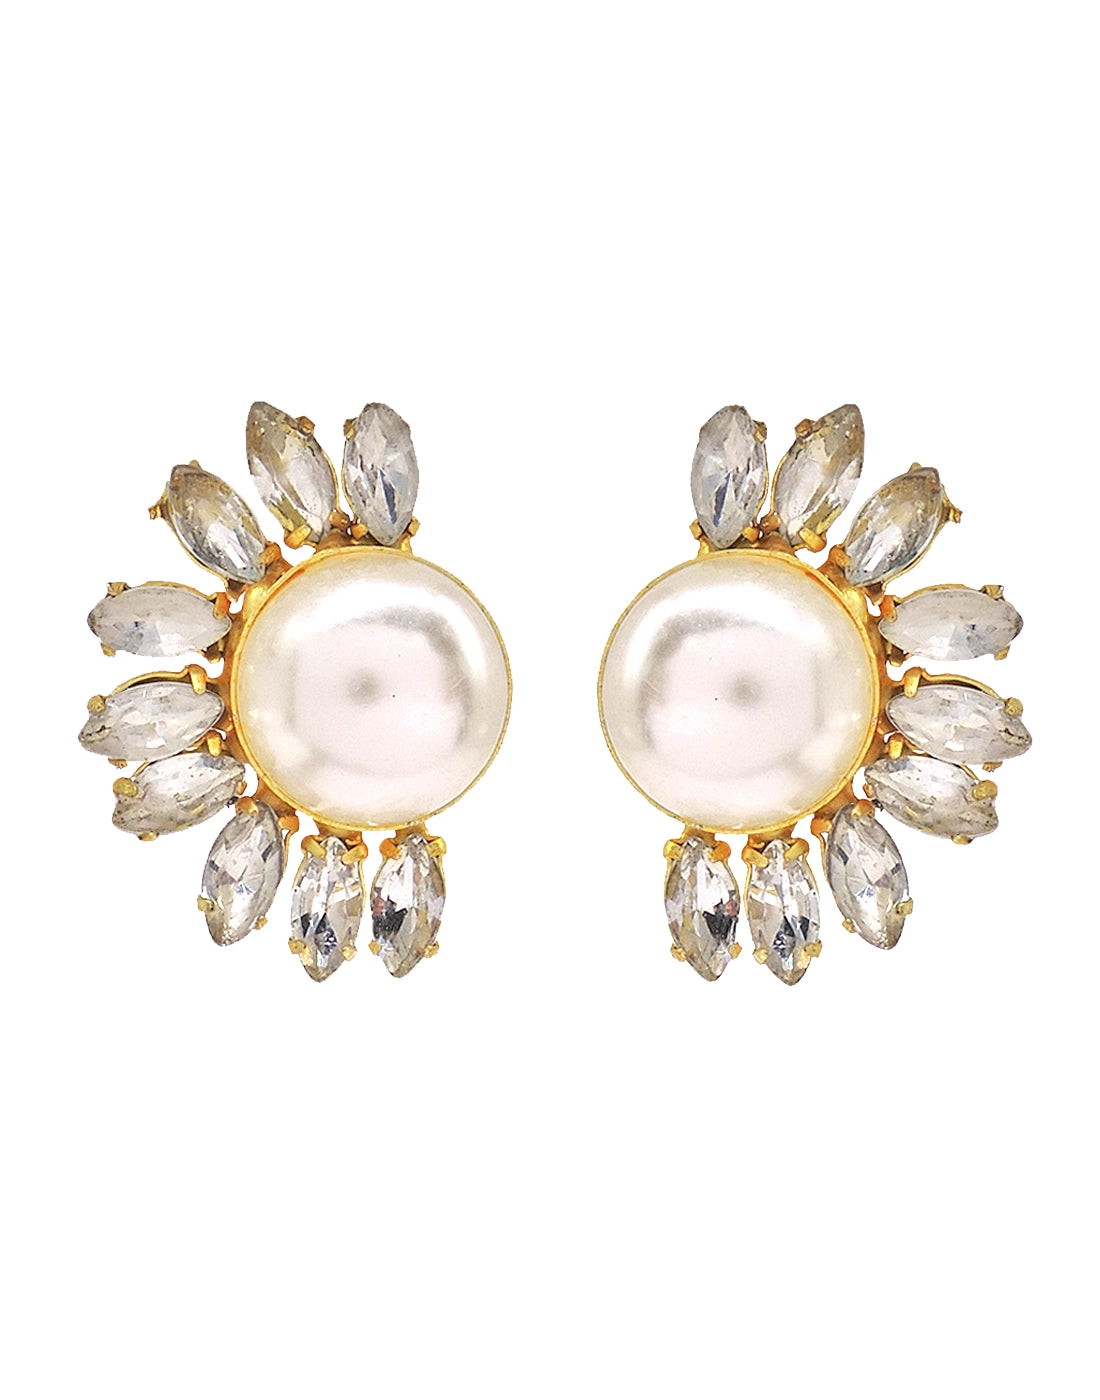 Pearl & Crystal Half Flora Earrings- Handcrafted Jewellery from Dori